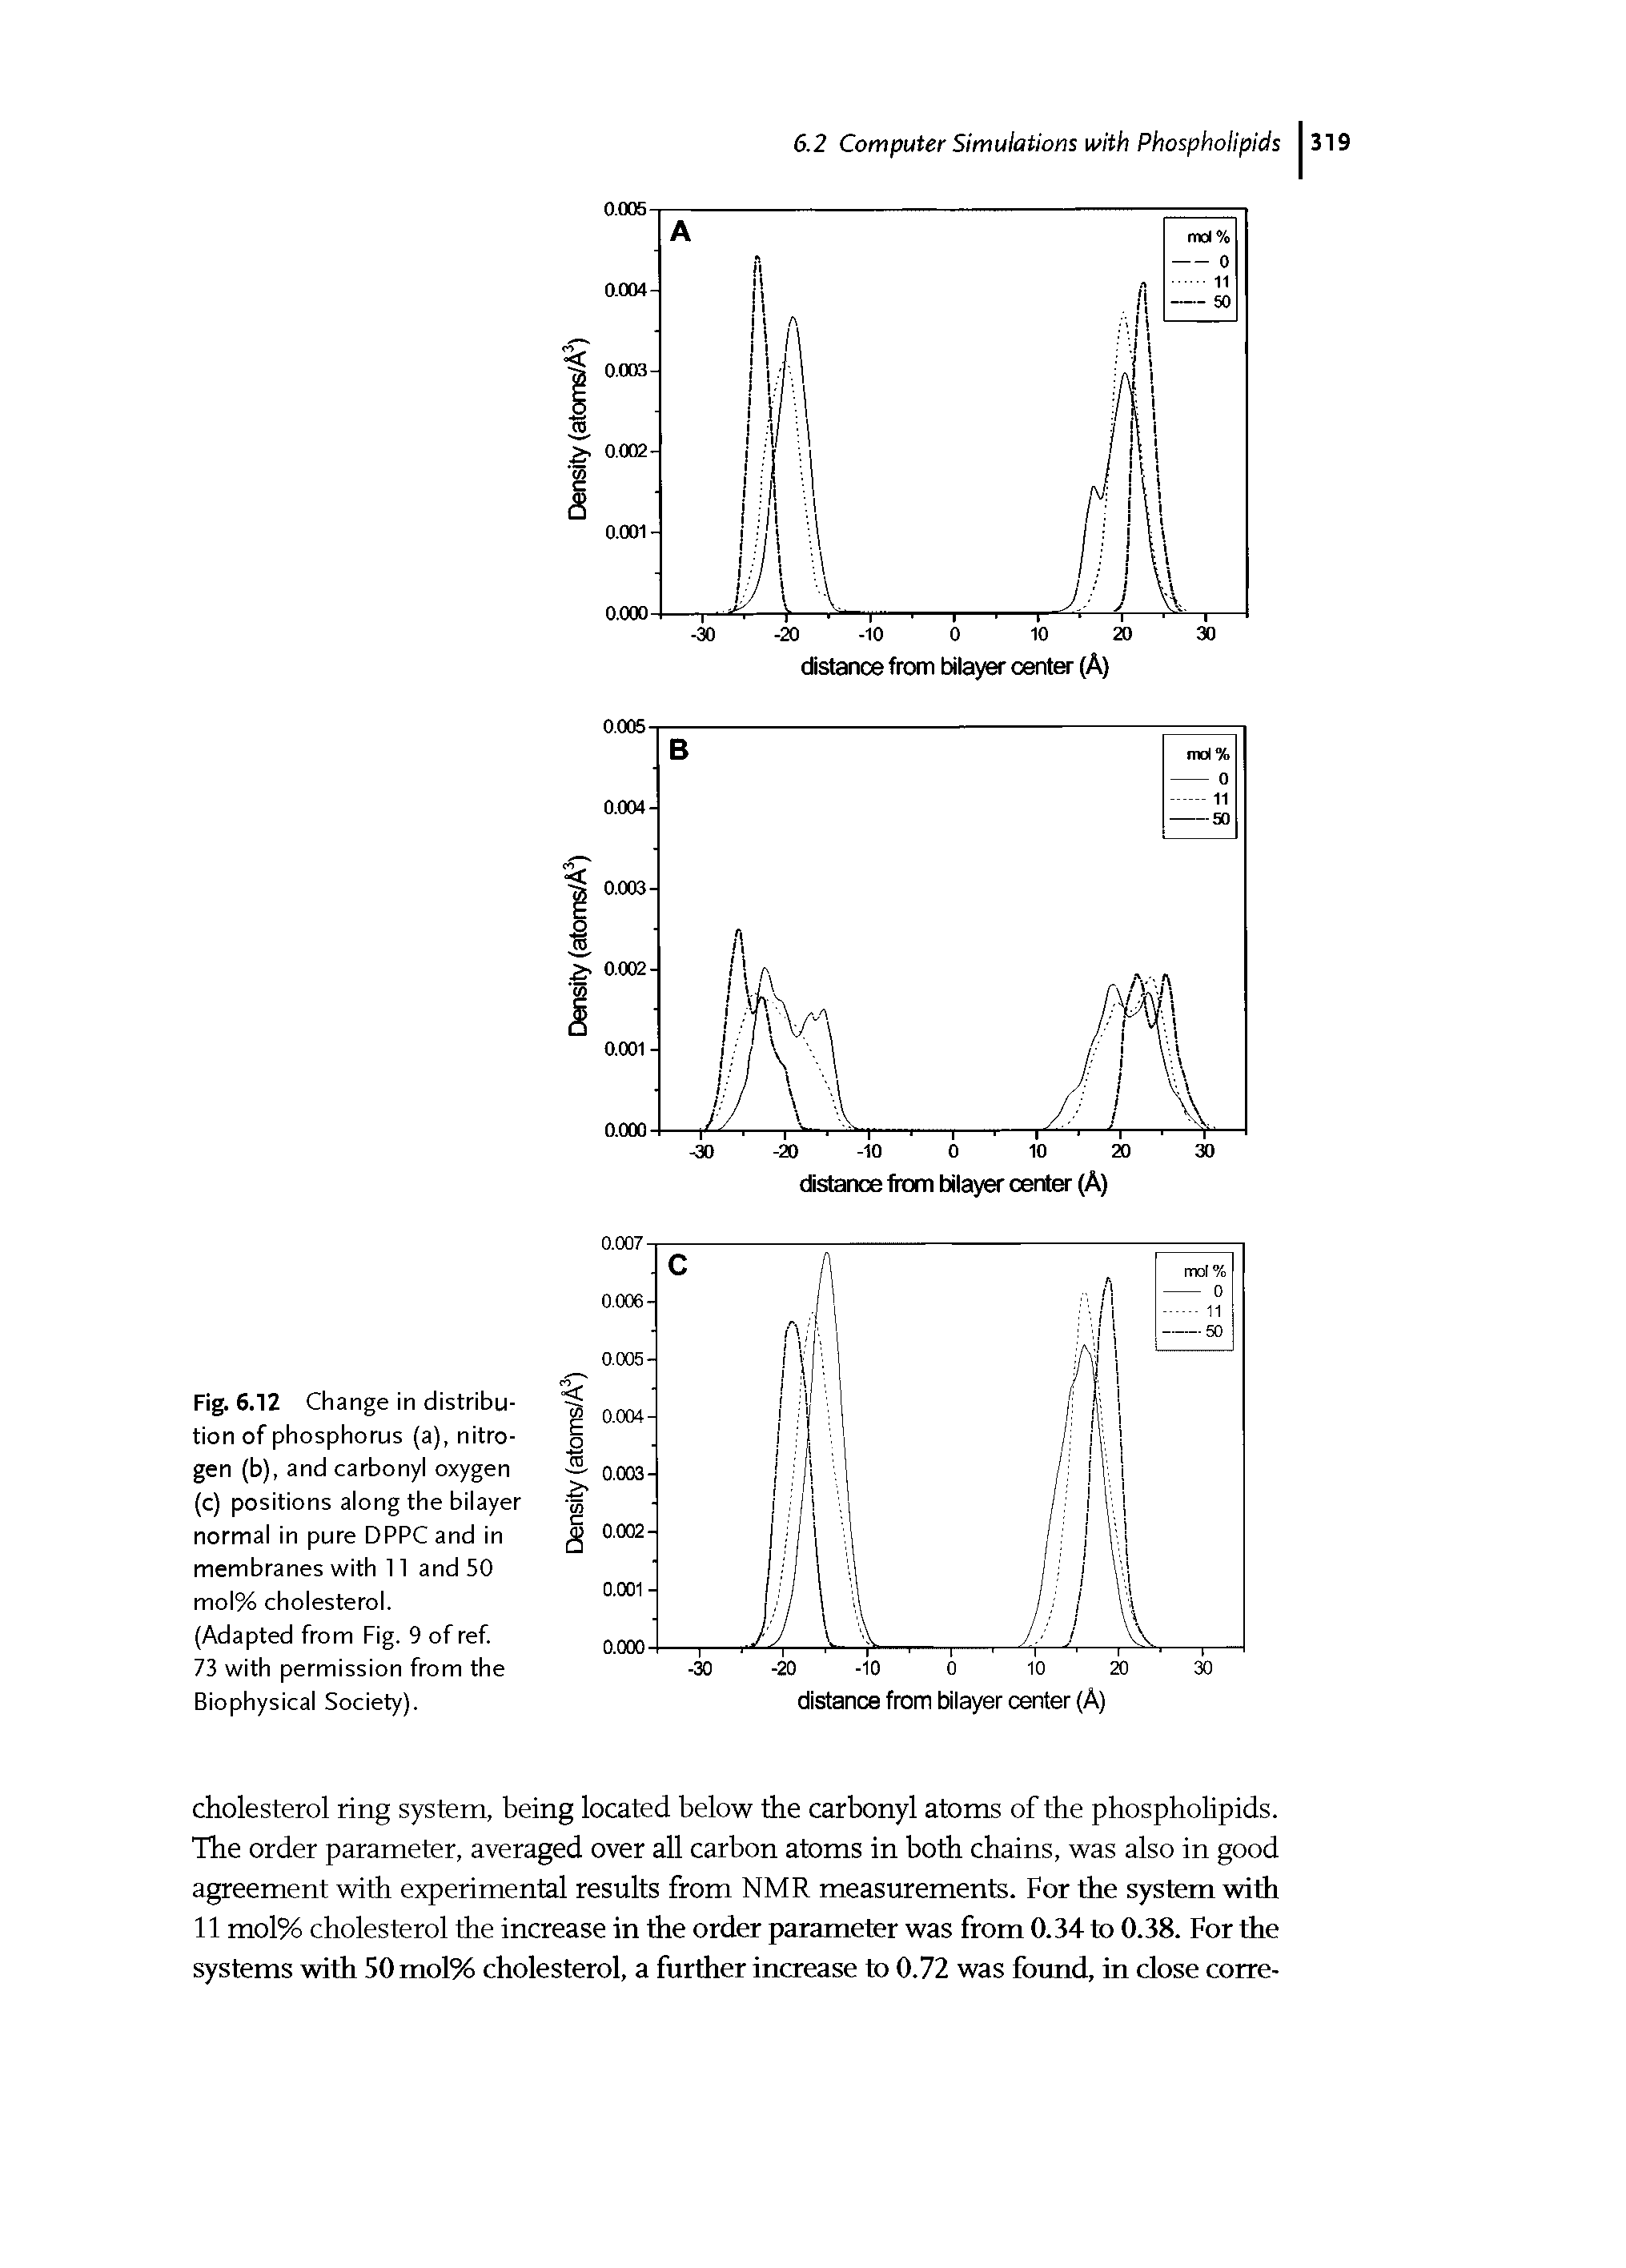 Fig. 6.12 Change in distribution of phosphorus (a), nitrogen (b), and carbonyl oxygen (c) positions along the bilayer normal in pure DPPC and in membranes with 11 and 50 mol% cholesterol.